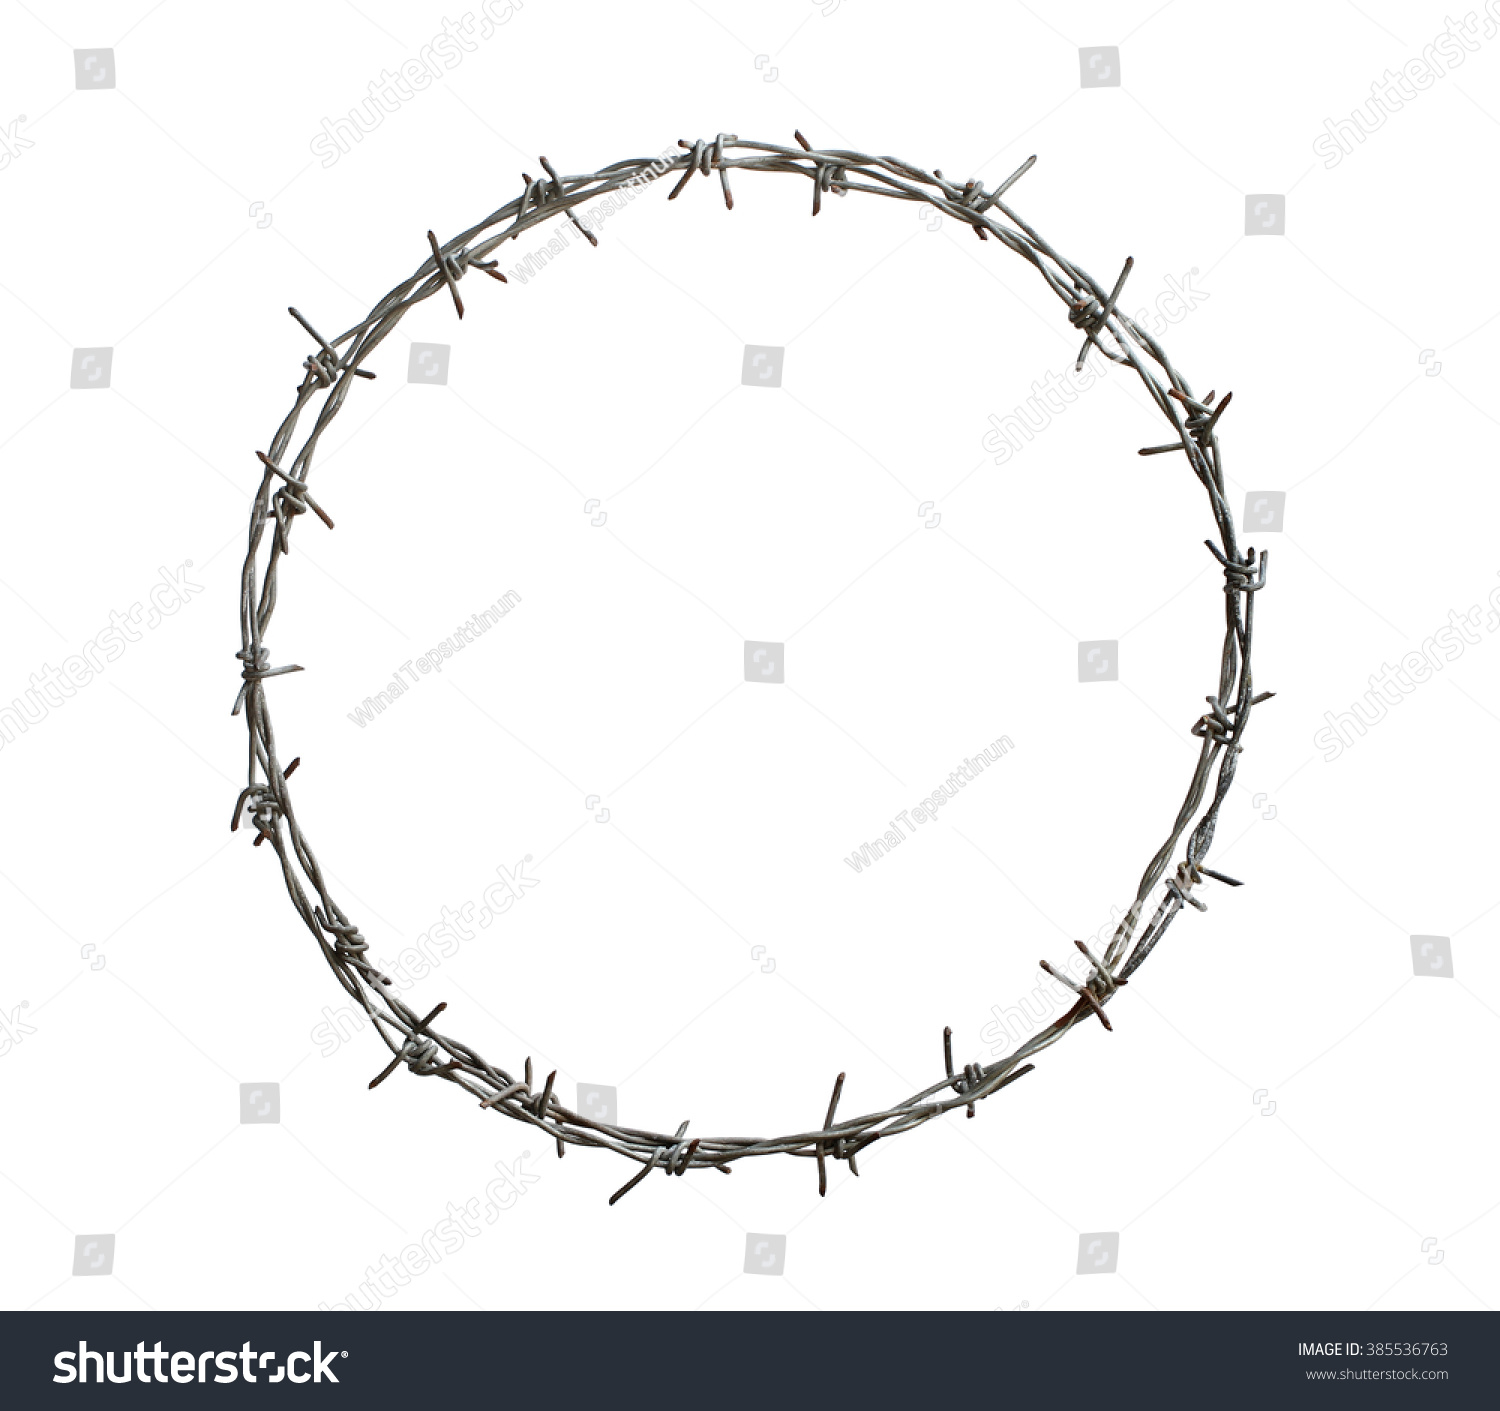 Barbed wire circle isolated on white background #385536763